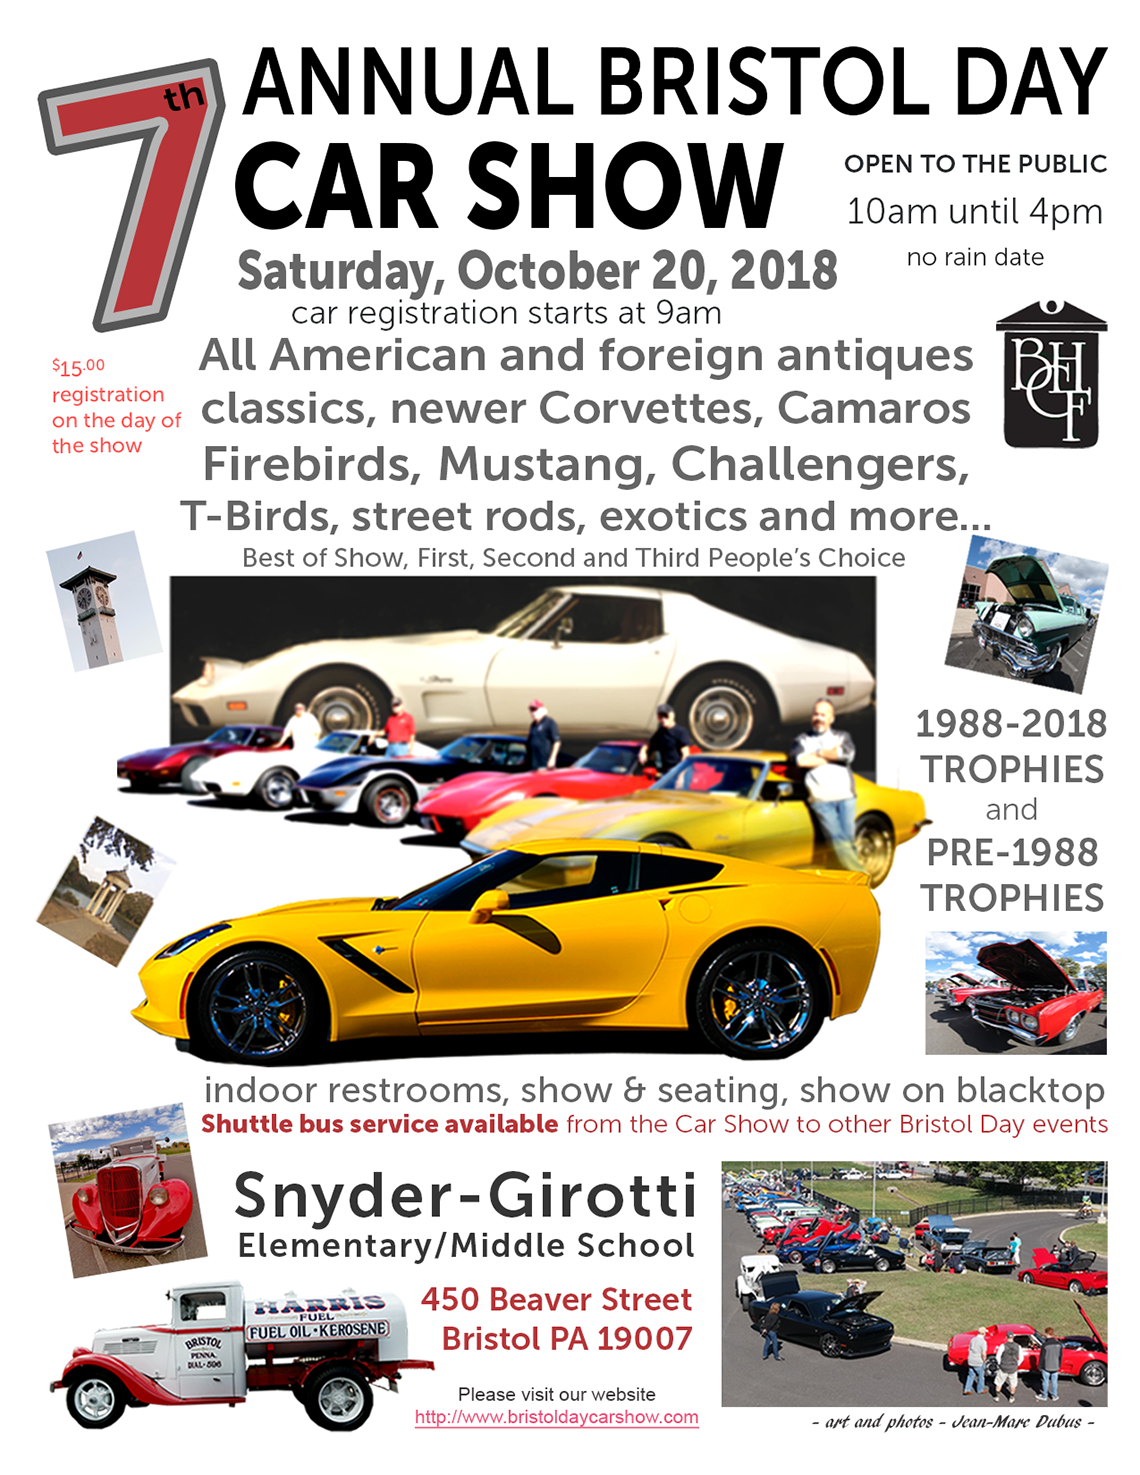 The 2018 Bristol Day Car Show